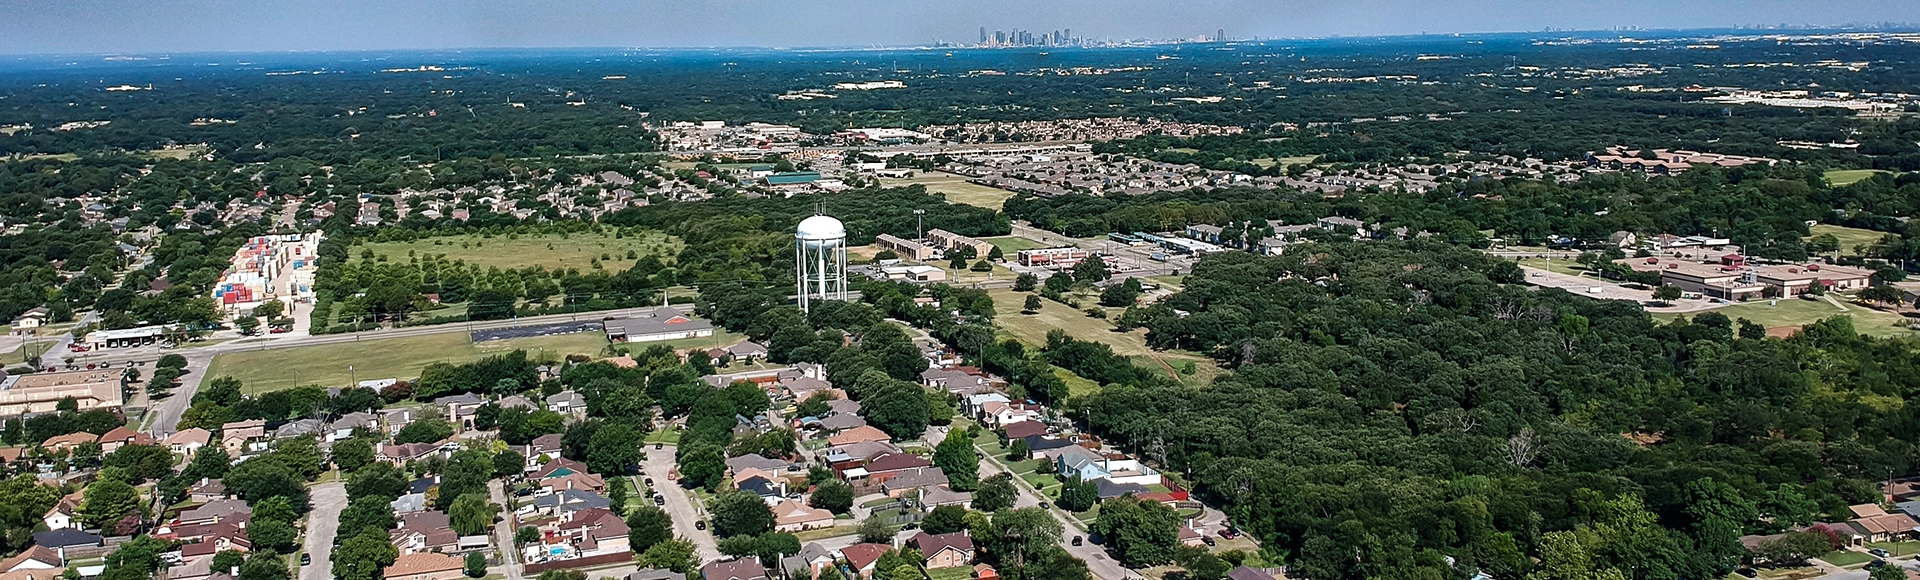 Aerial view view of a neighborhood in Dallas, Highland Park
